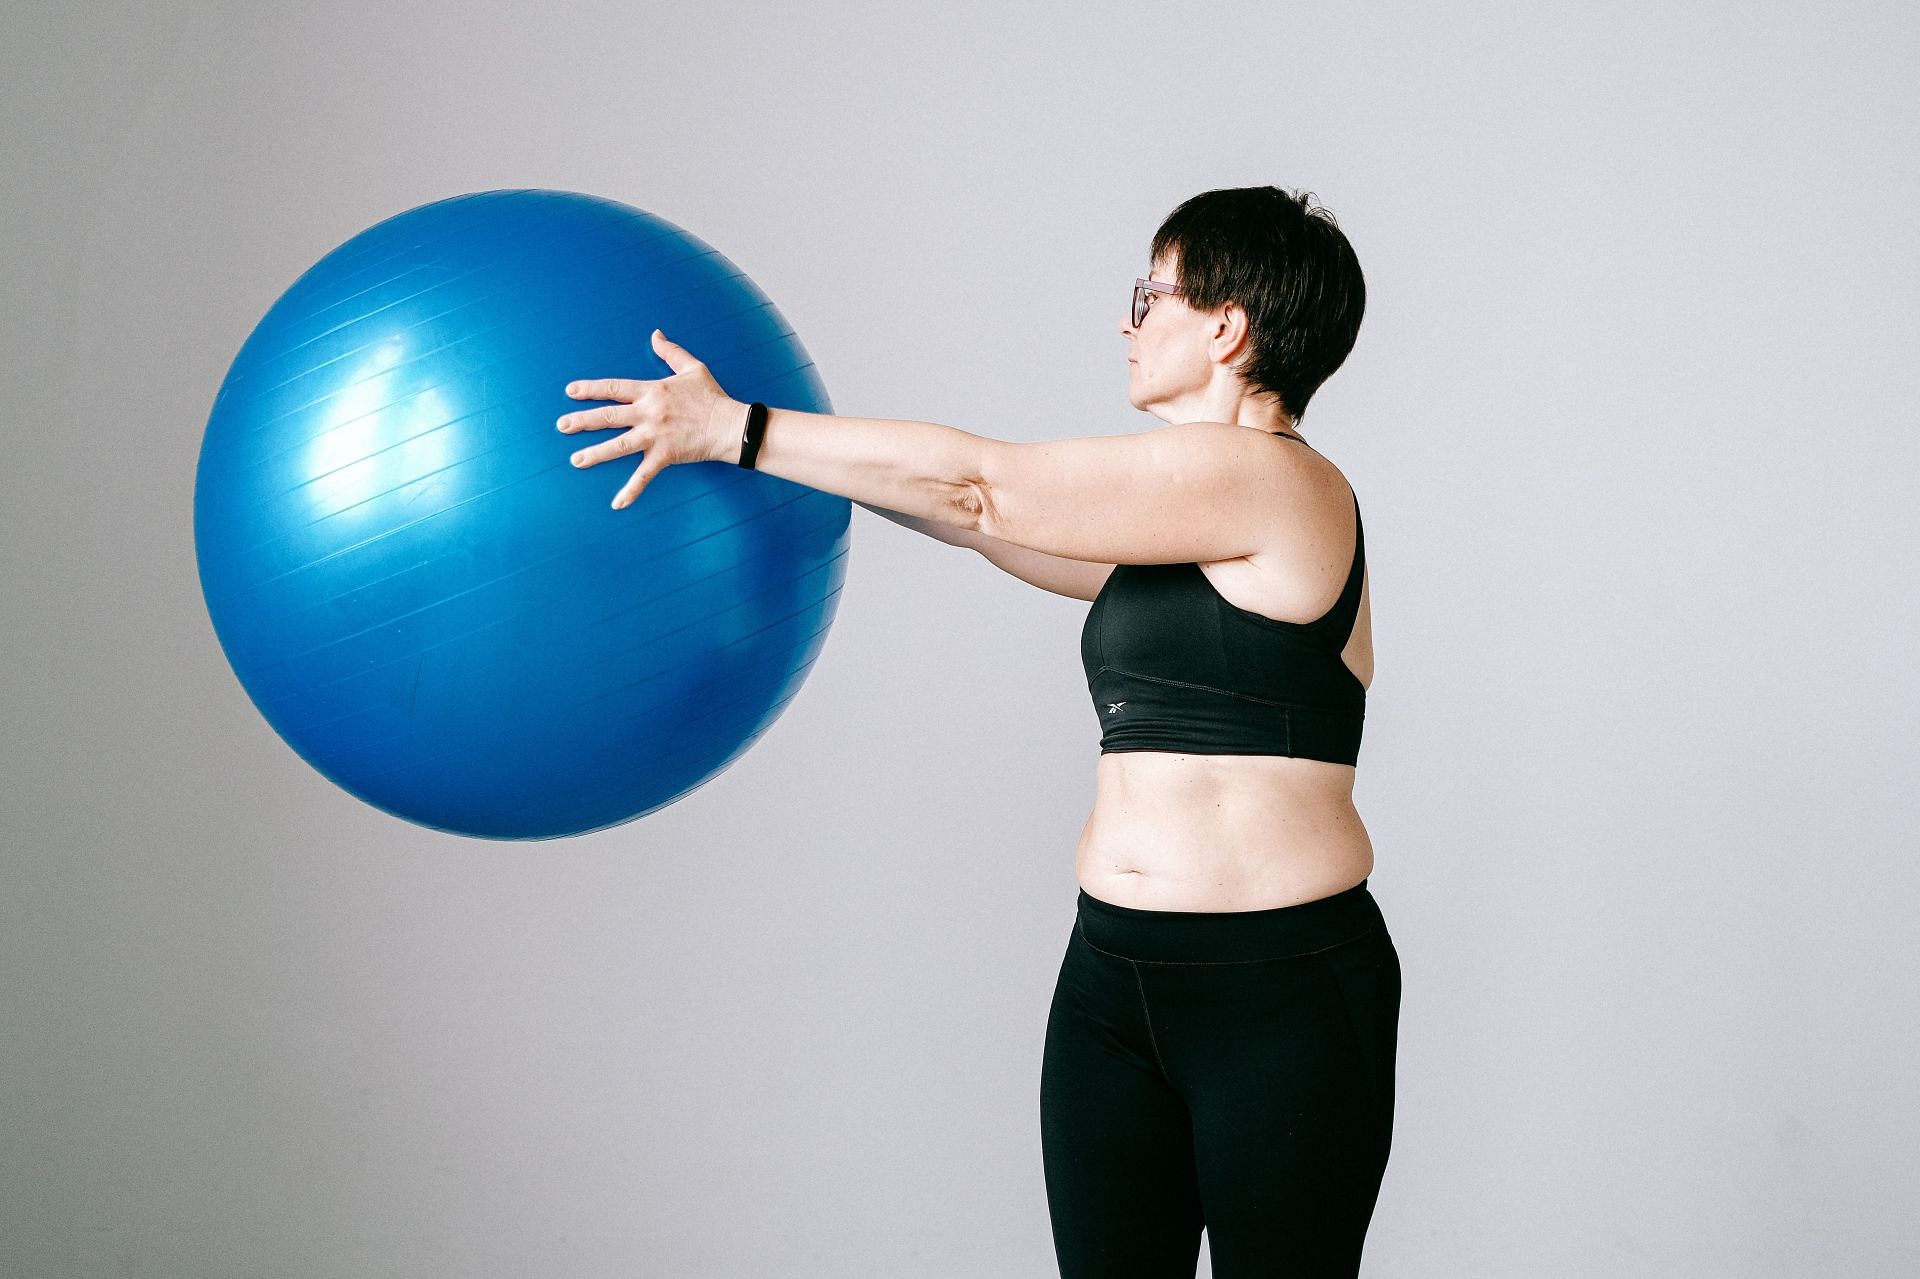 Exercise balls are an excellent equipment to work out with (Image via Pexels @Anna Shvets)